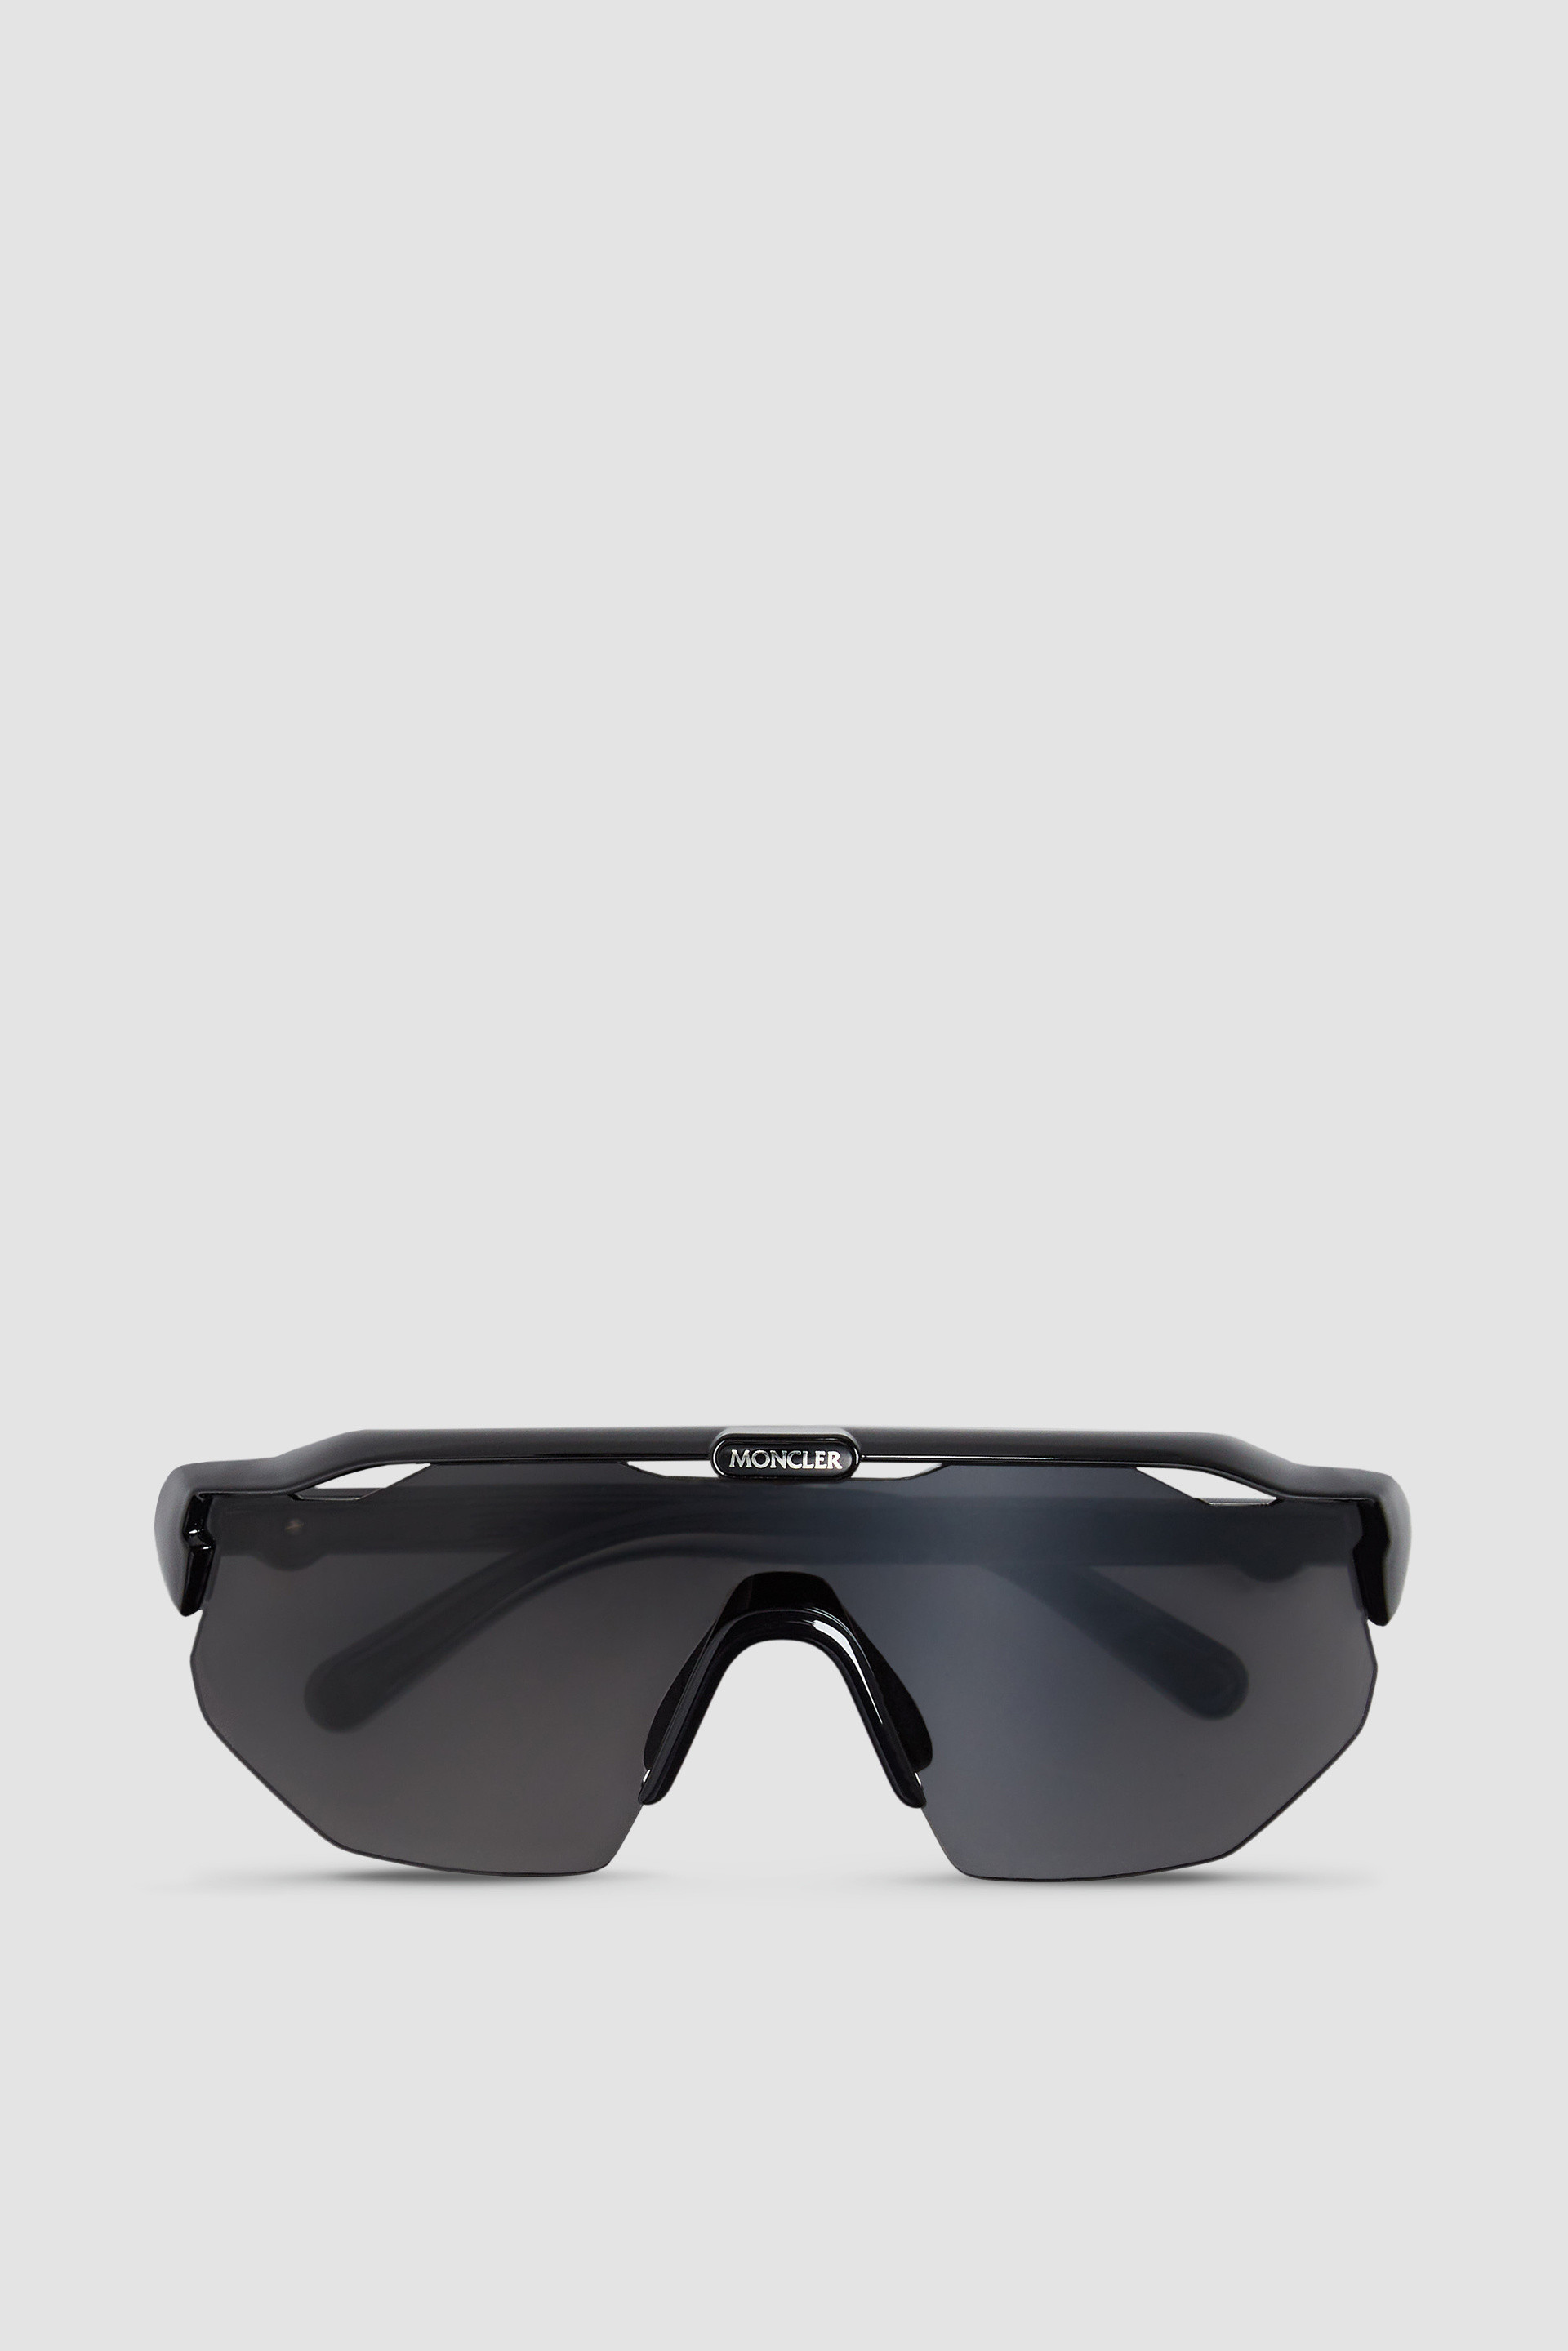 Square Louis Vuitton style sunglasses with white armor and dark lenses